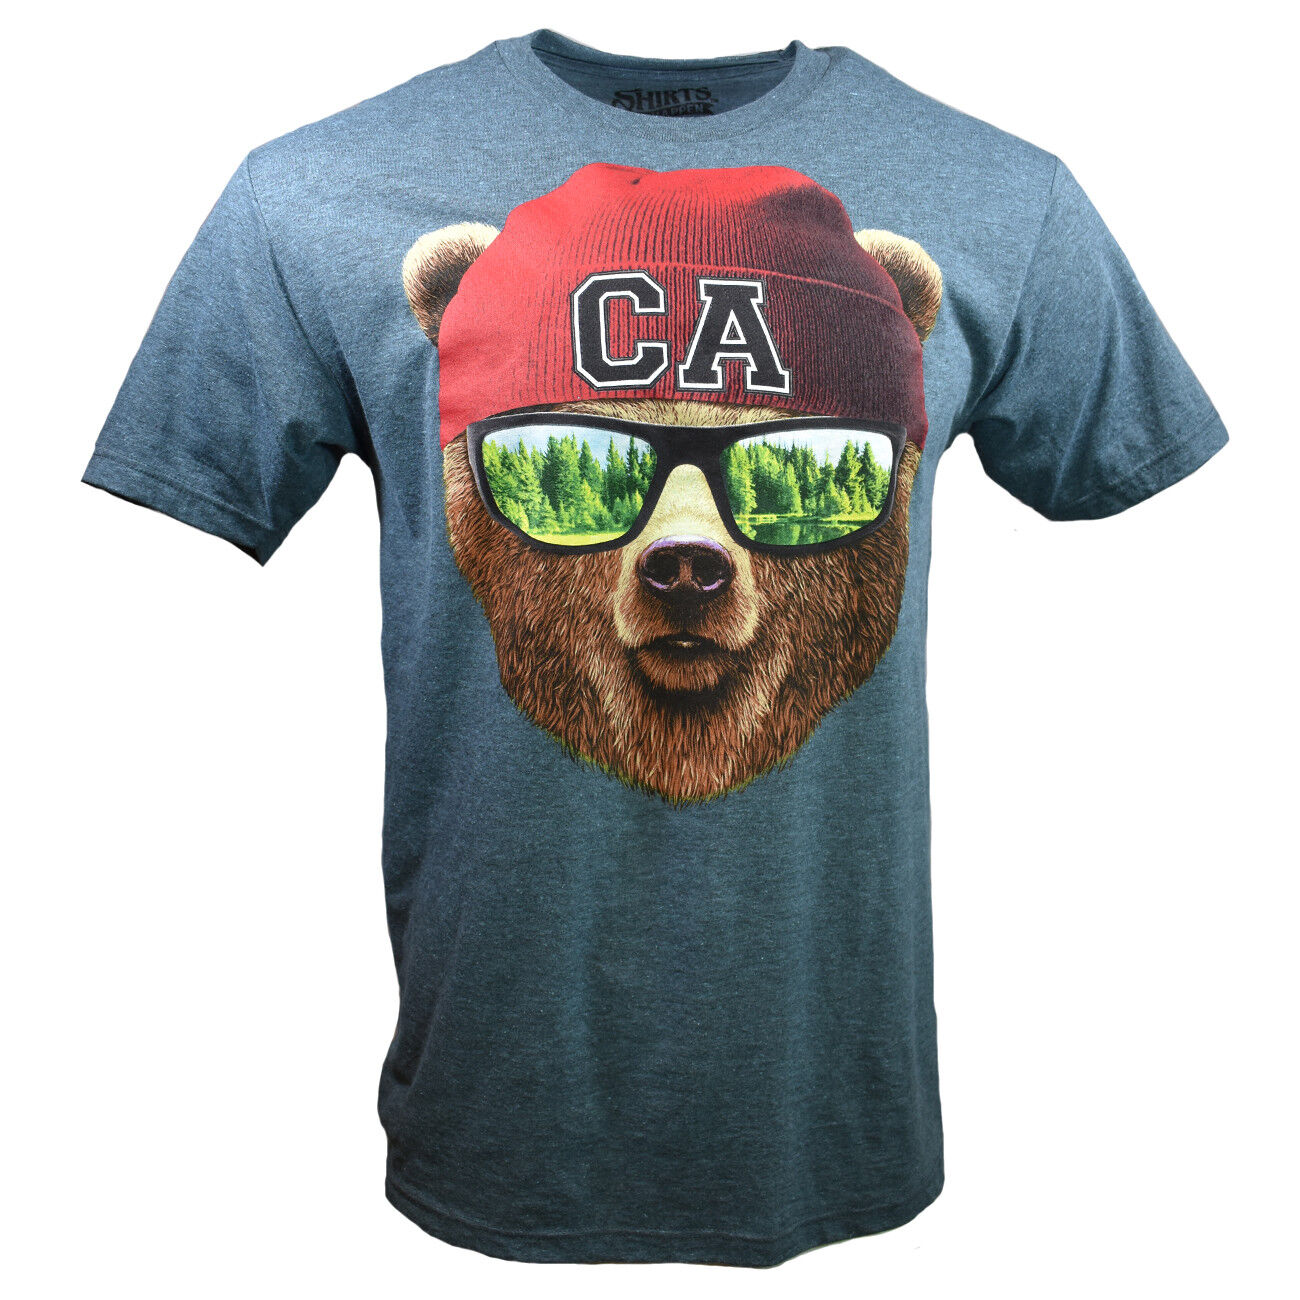 California Bear T-Shirt - CA Bear with Sunglasses and Beanie Graphic Print on Heather Slate Color